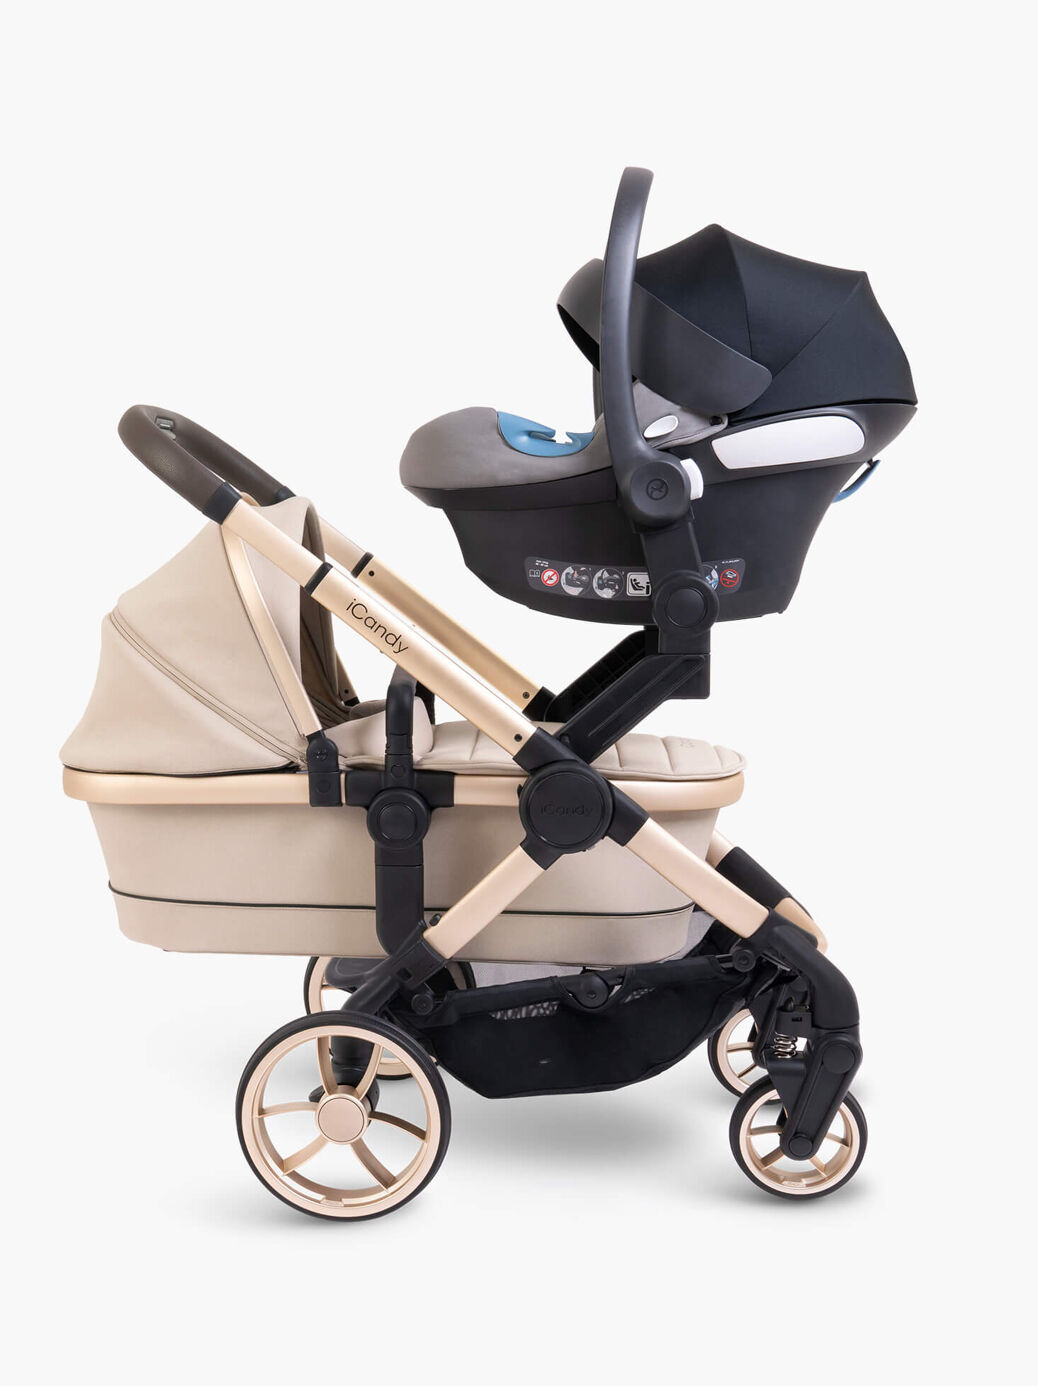 Peach 7 Twin Pushchair & Carrycot in Biscotti - iCandy